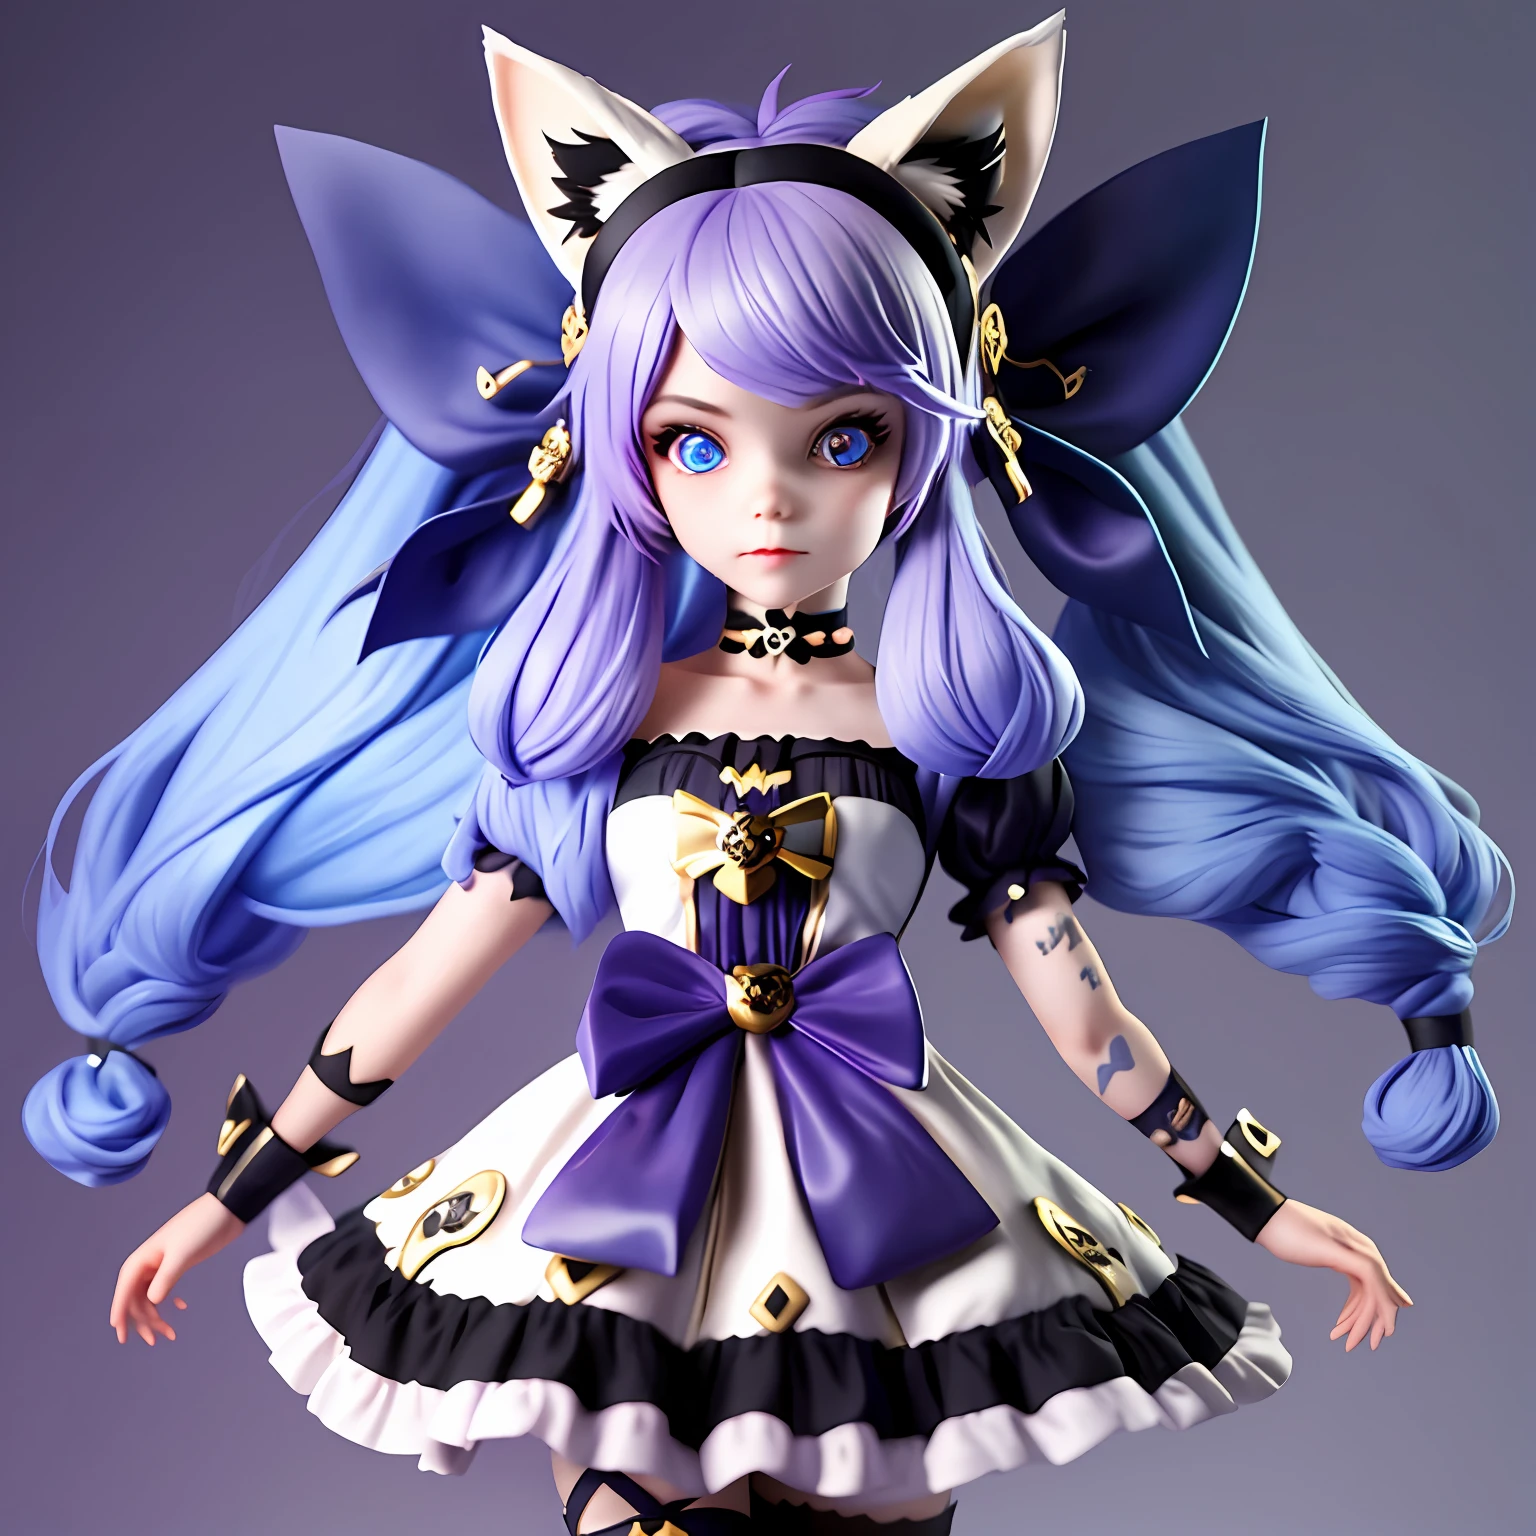 A girl with long purple hair and blue eyes with fox ears and tail is wearing a lolita style outfit with a black double skull headband